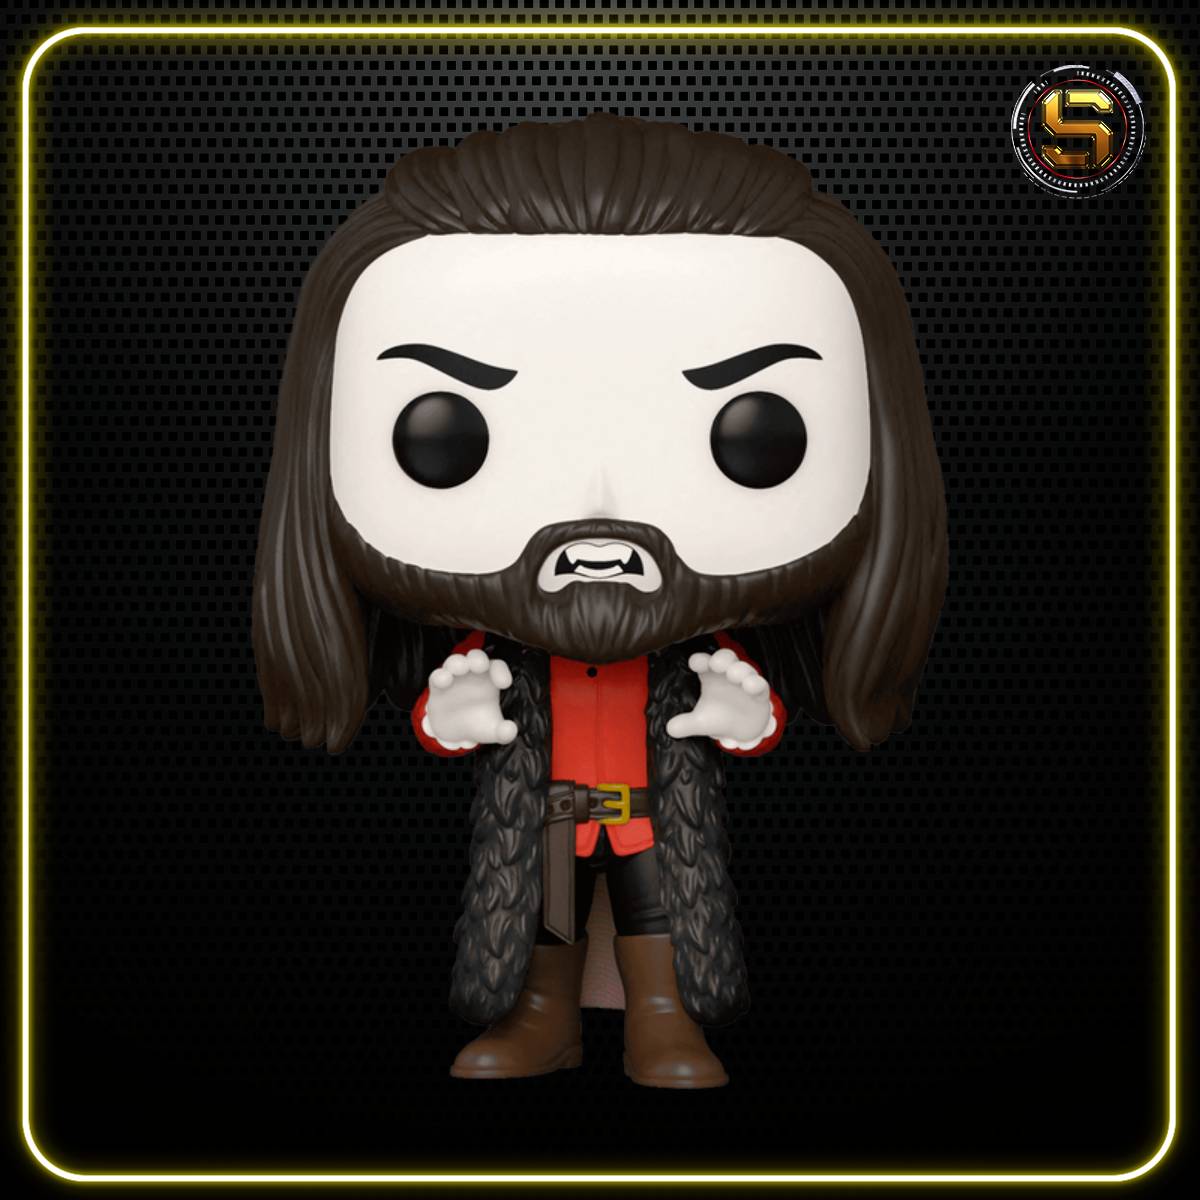 FUNKO POP TV WHAT WE DO IN THE SHADOWS NANDOR THE RELENTLESS 1326